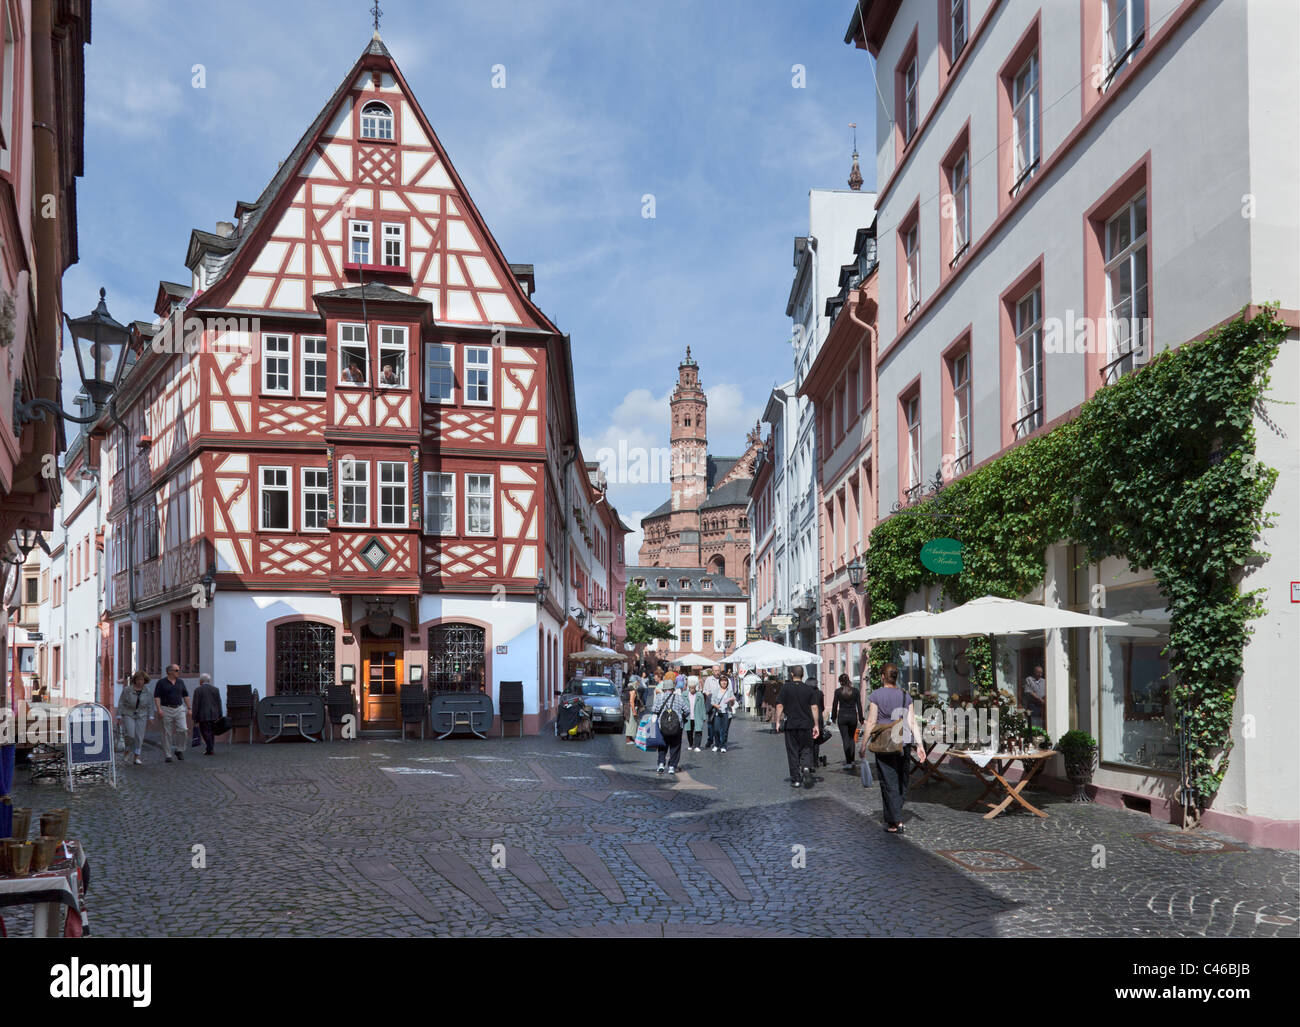 A small square in the narrow streets of Mainz's Altstadt (Old Town) area. Stock Photo